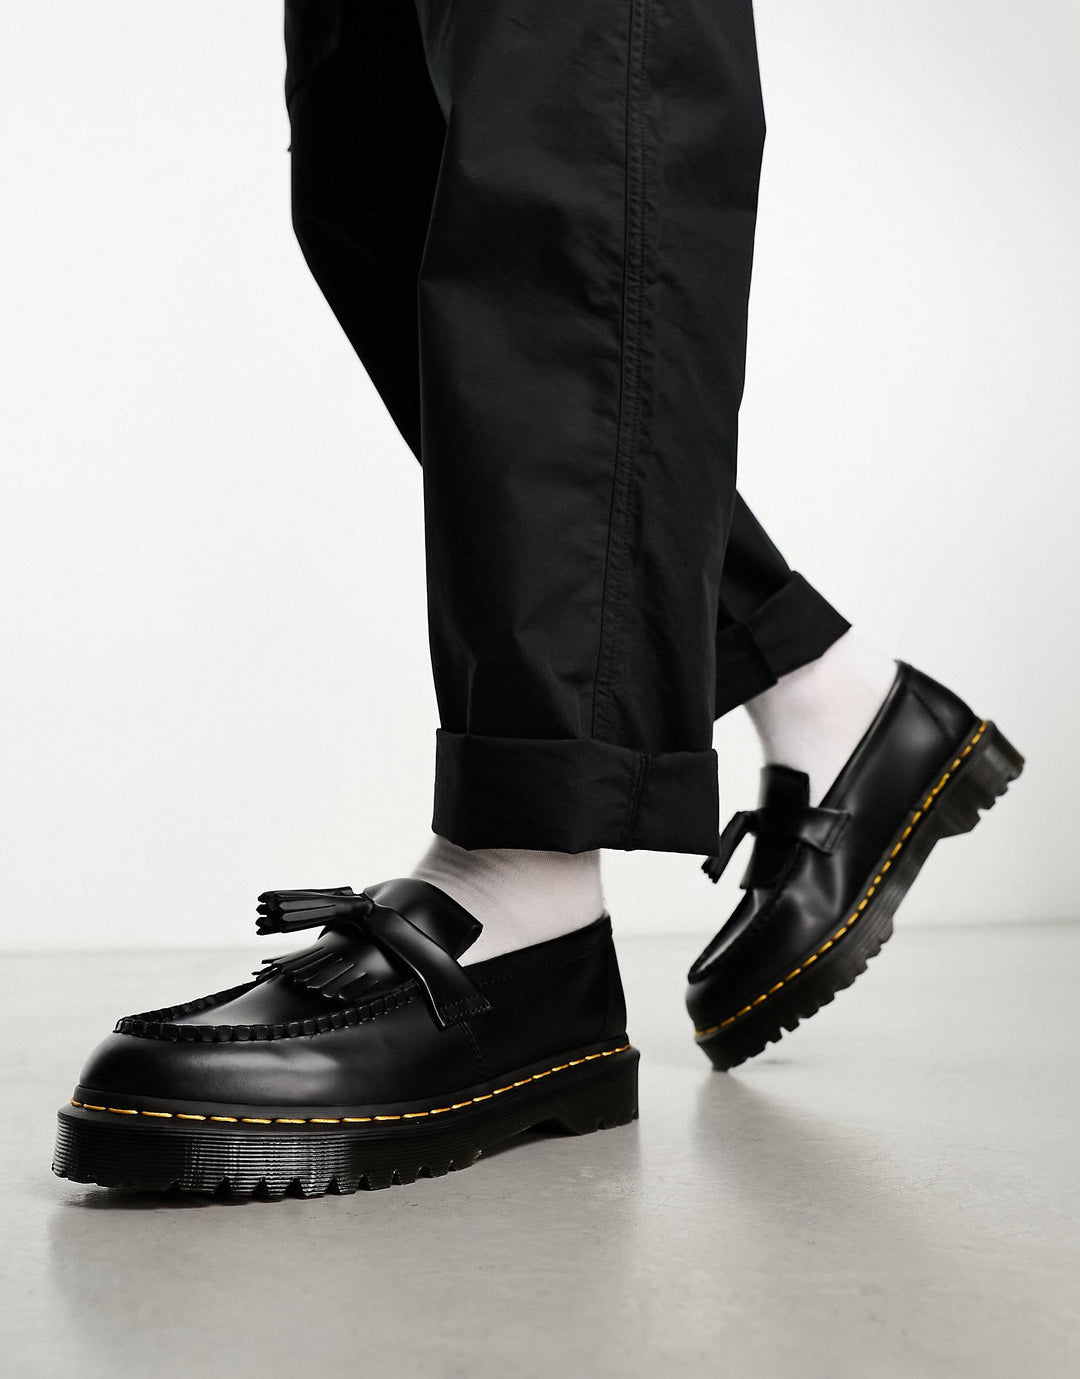 Dr Martens Adrian Loafers in black